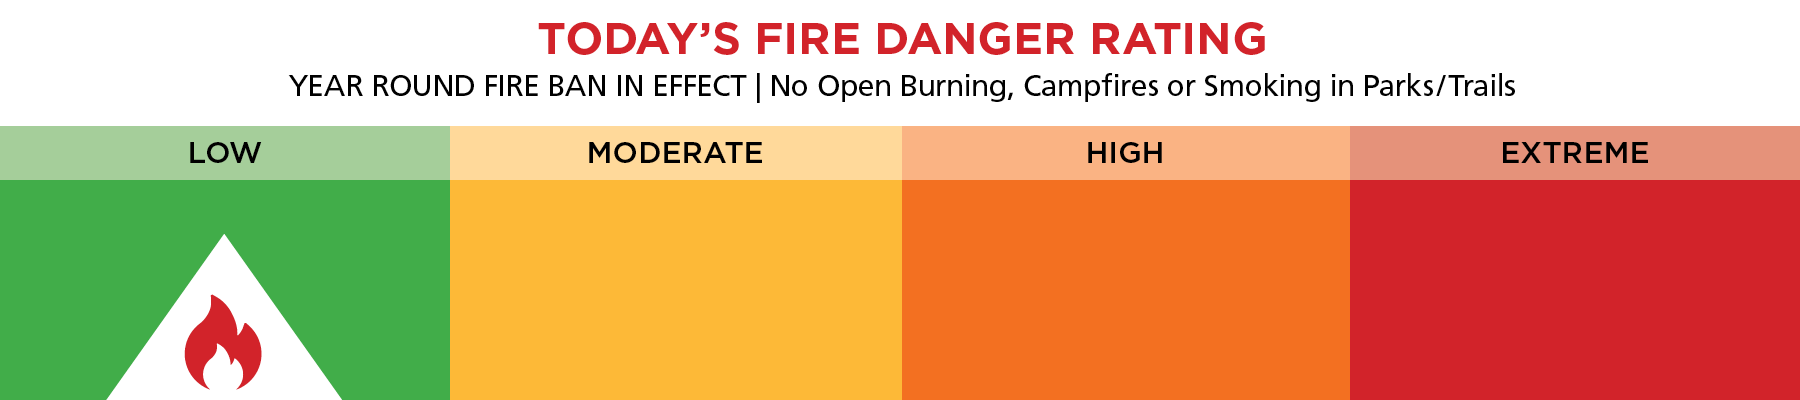 Fire Rating in Parks - LOW